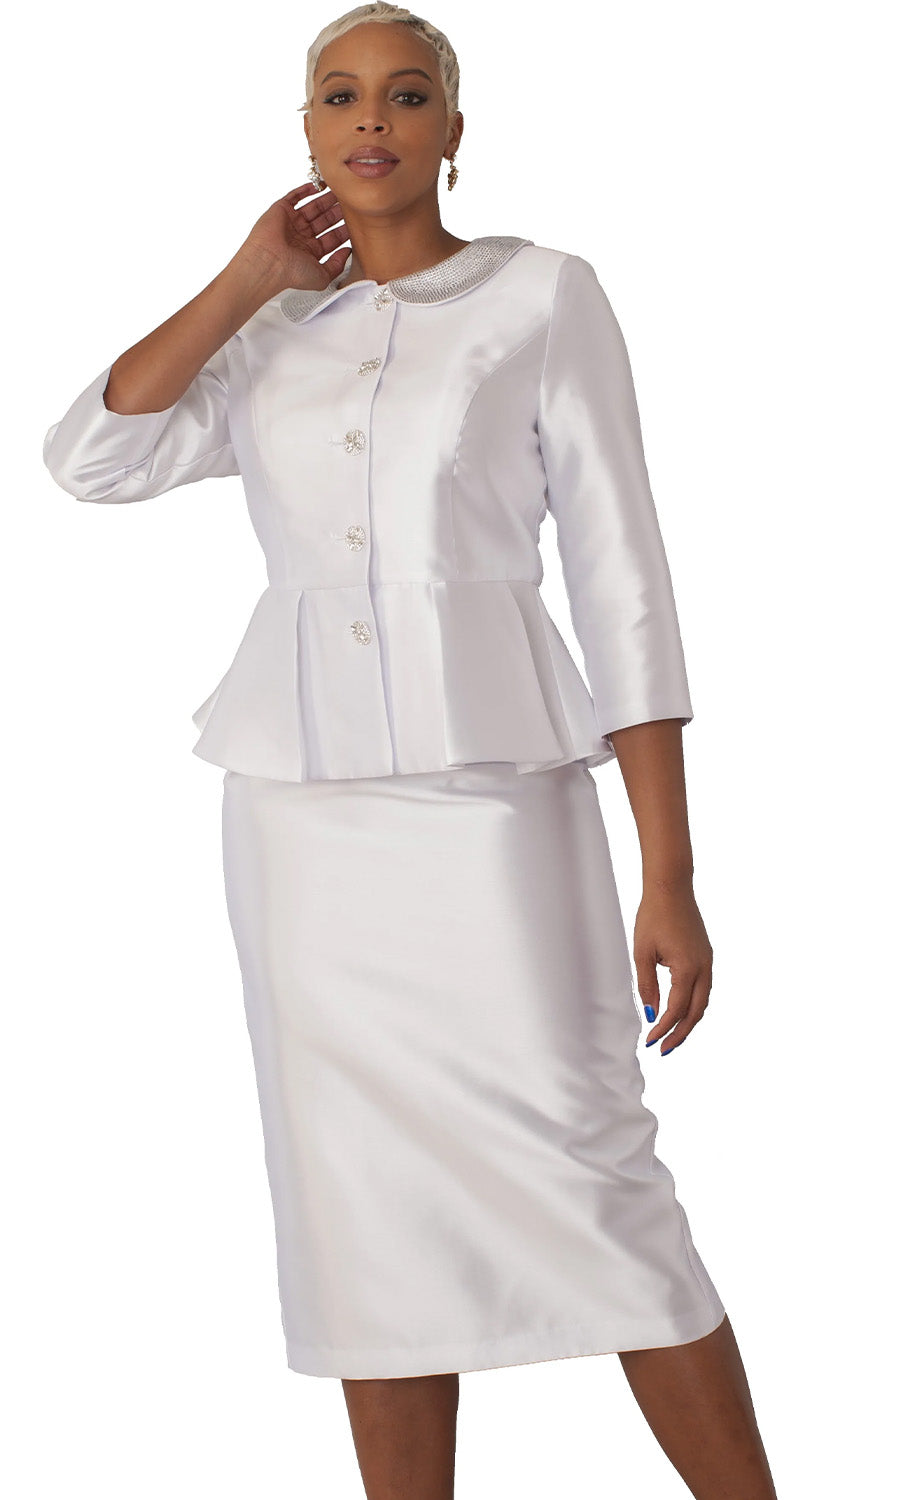 Tally Taylor Church Suit 4811-White - Church Suits For Less